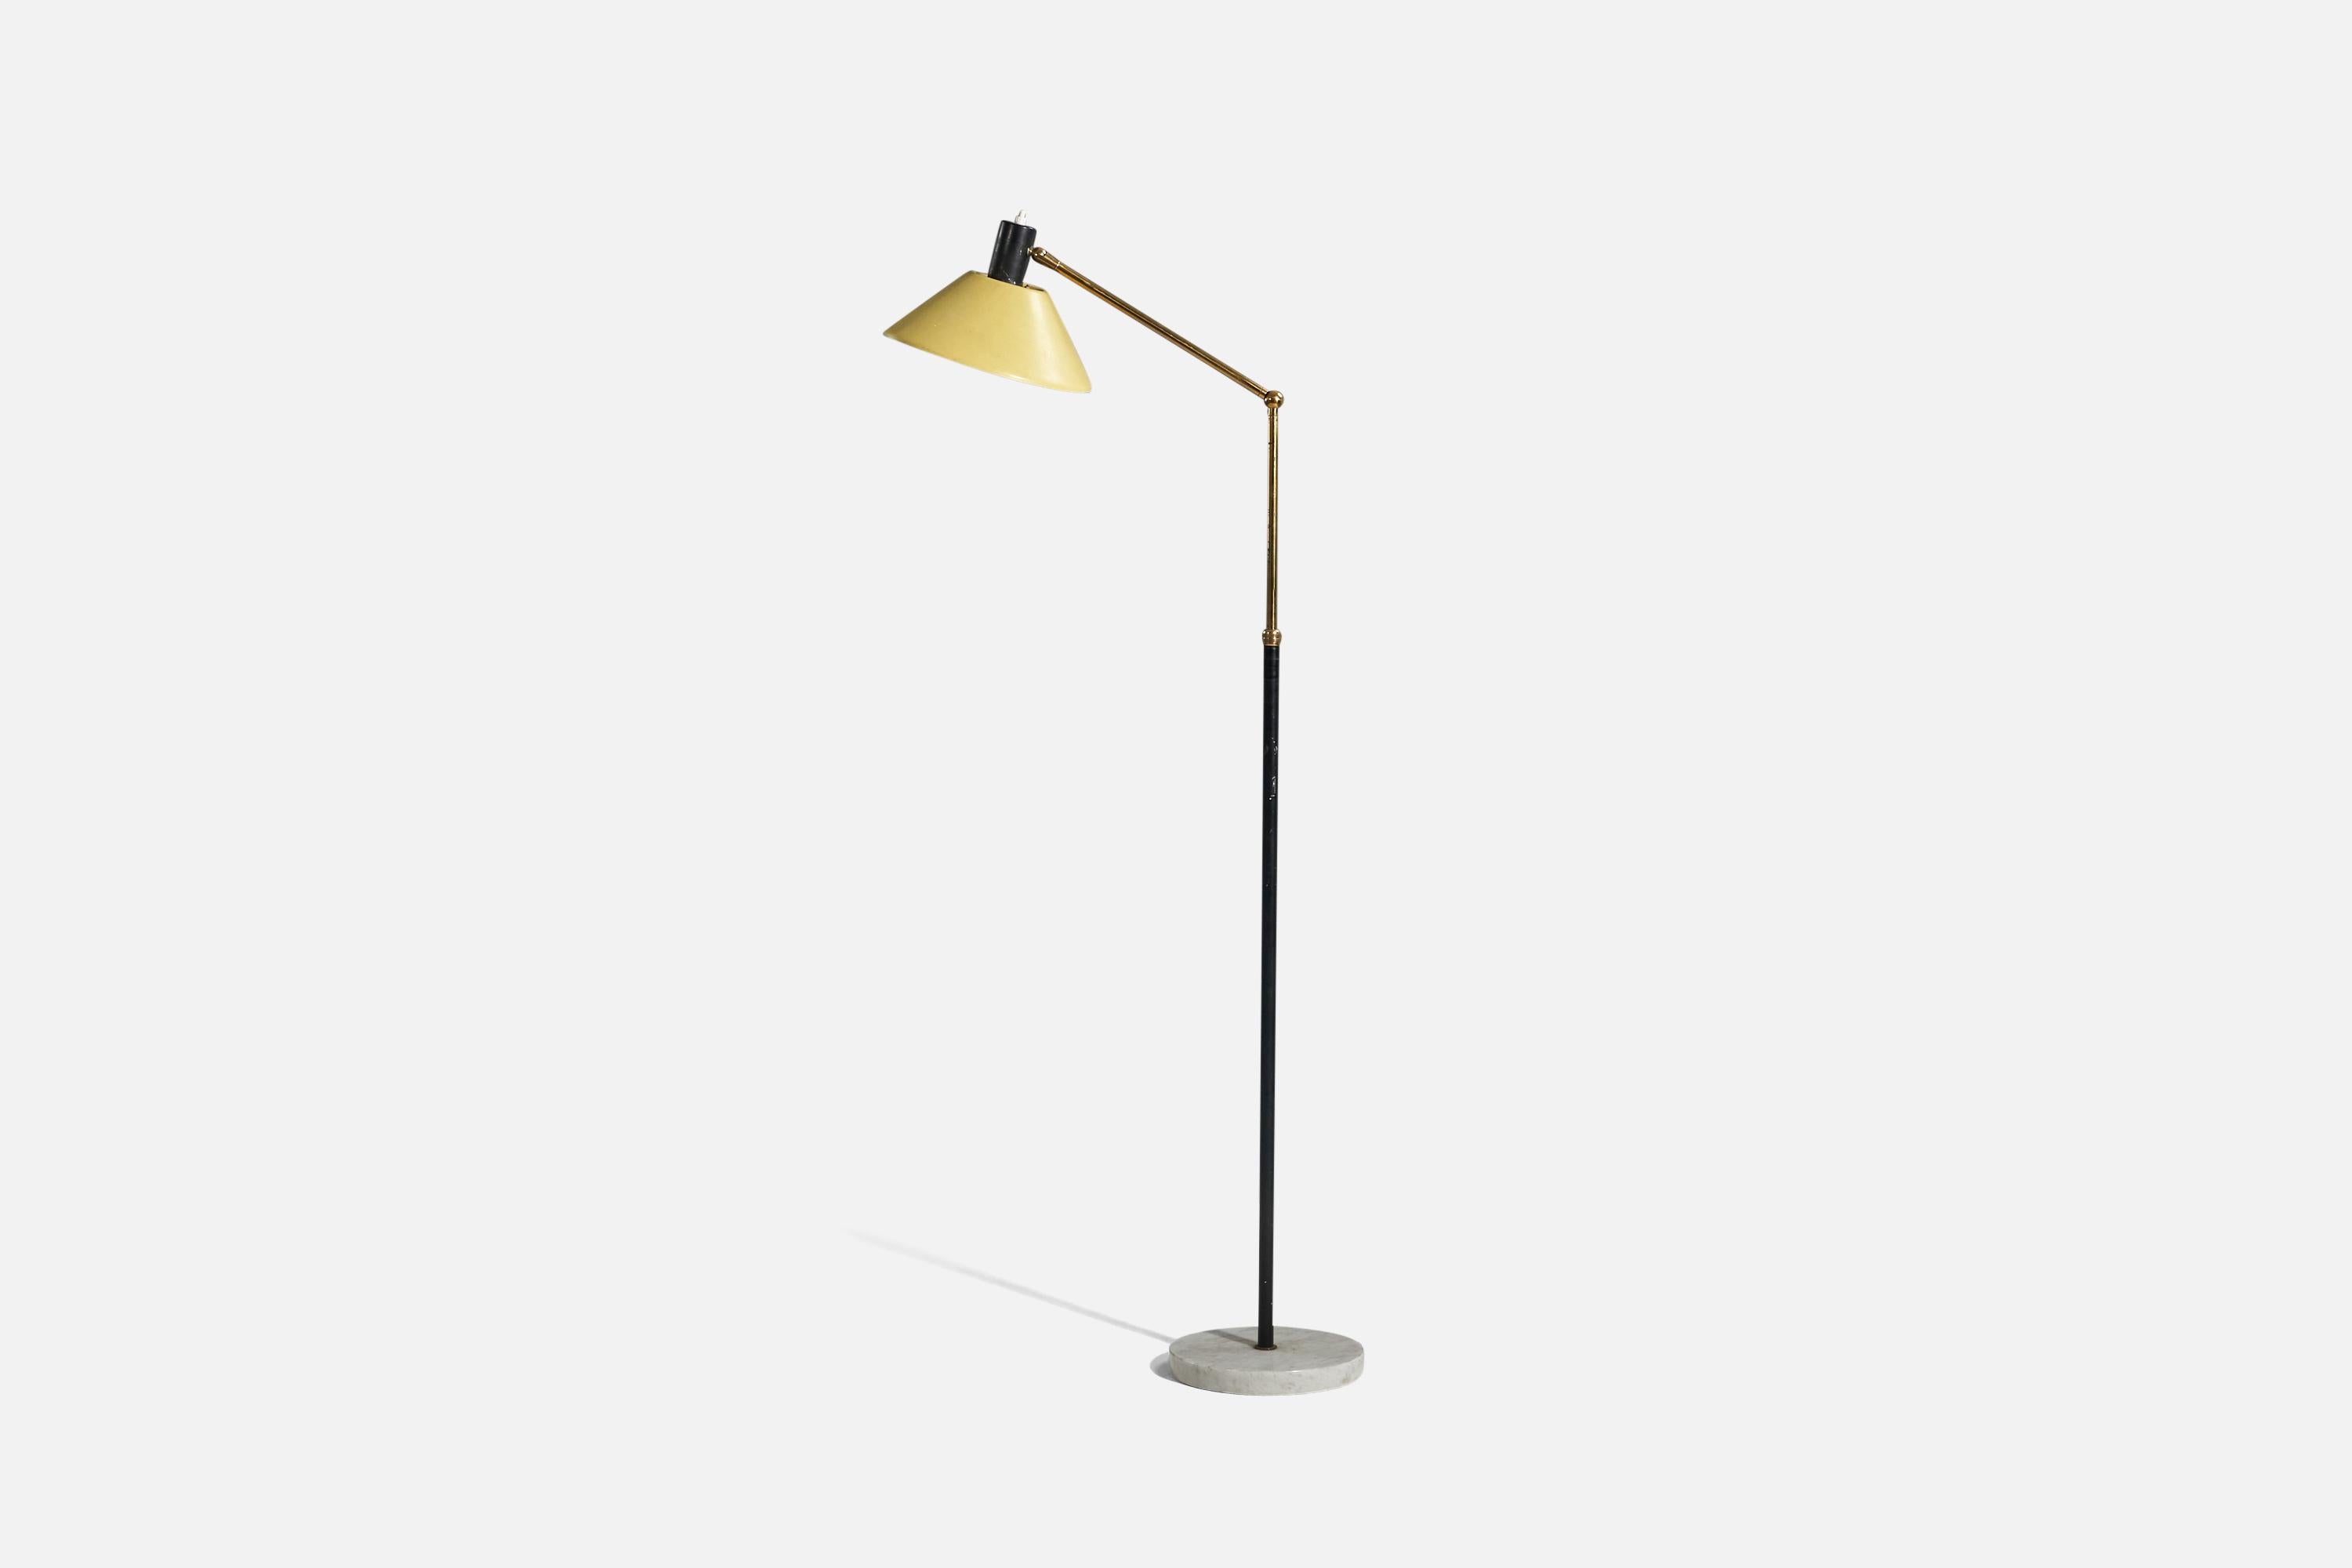 A brass, yellow and black-lacquered metal and marble floor lamp, designed and produced by Stilux Milano, Italy, 1950s.

Variable dimensions, measured as illustrated in the first image.

Socket takes standard E-26 medium base bulb.
There is no